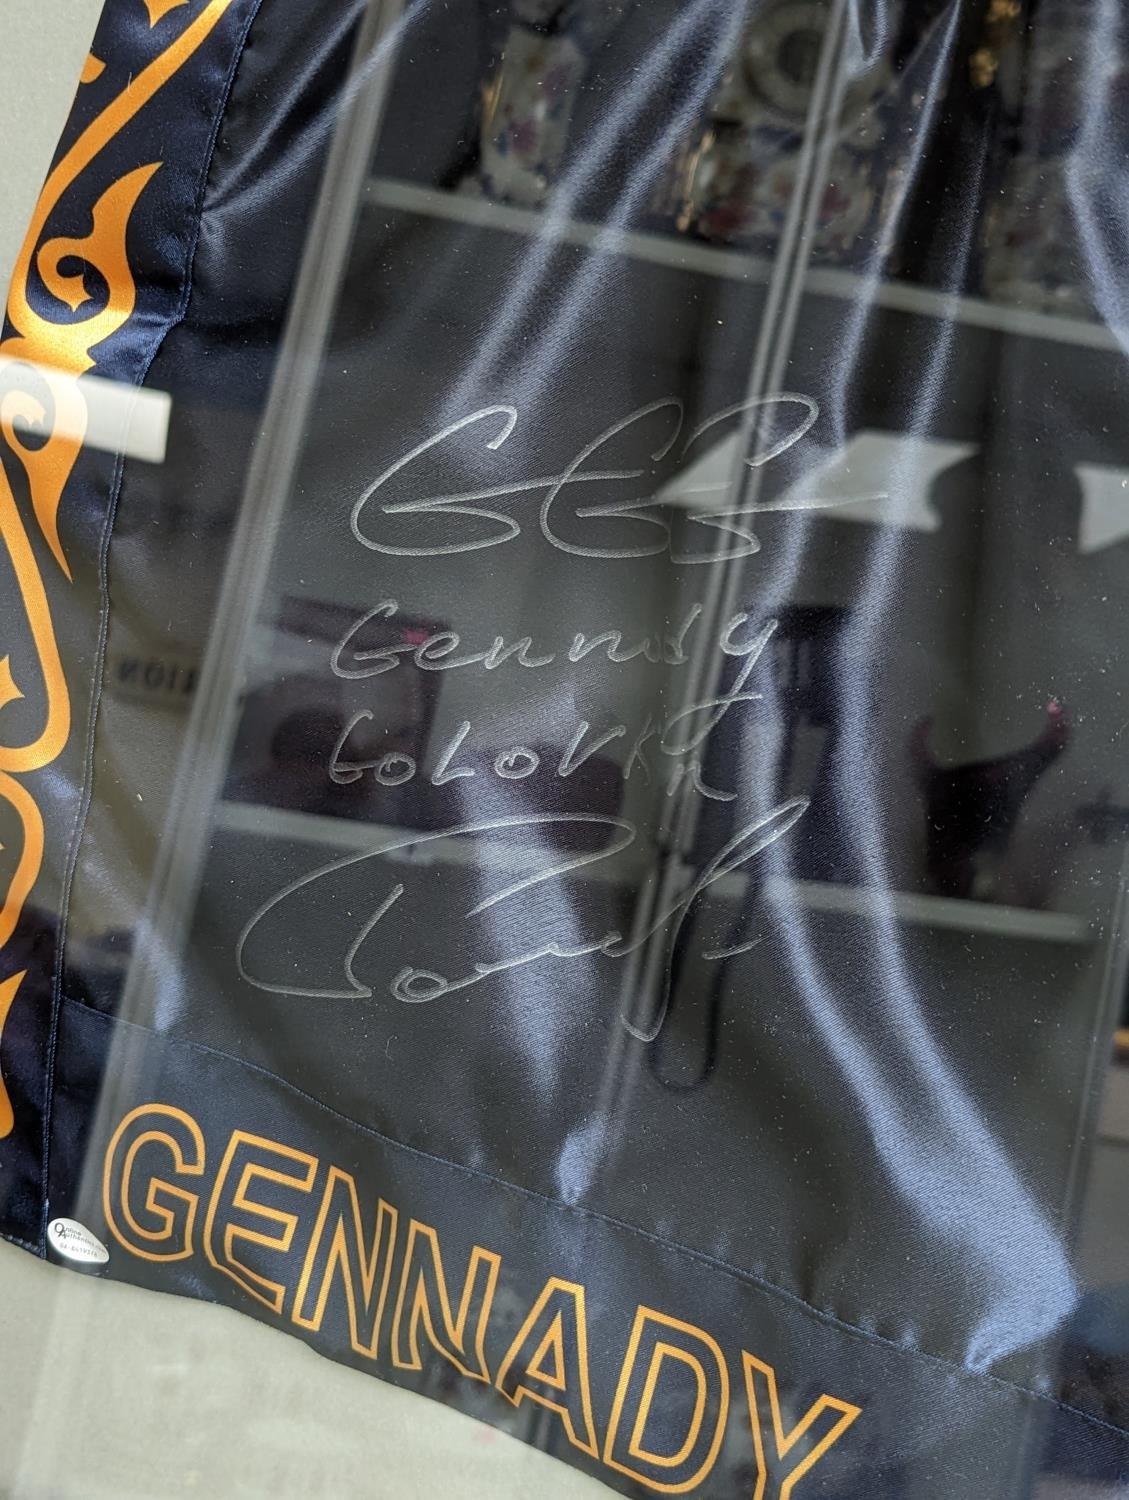 Gennady GGG Golovkin signed and framed blue boxing trunks. 85 x 82cm total size - Image 2 of 2